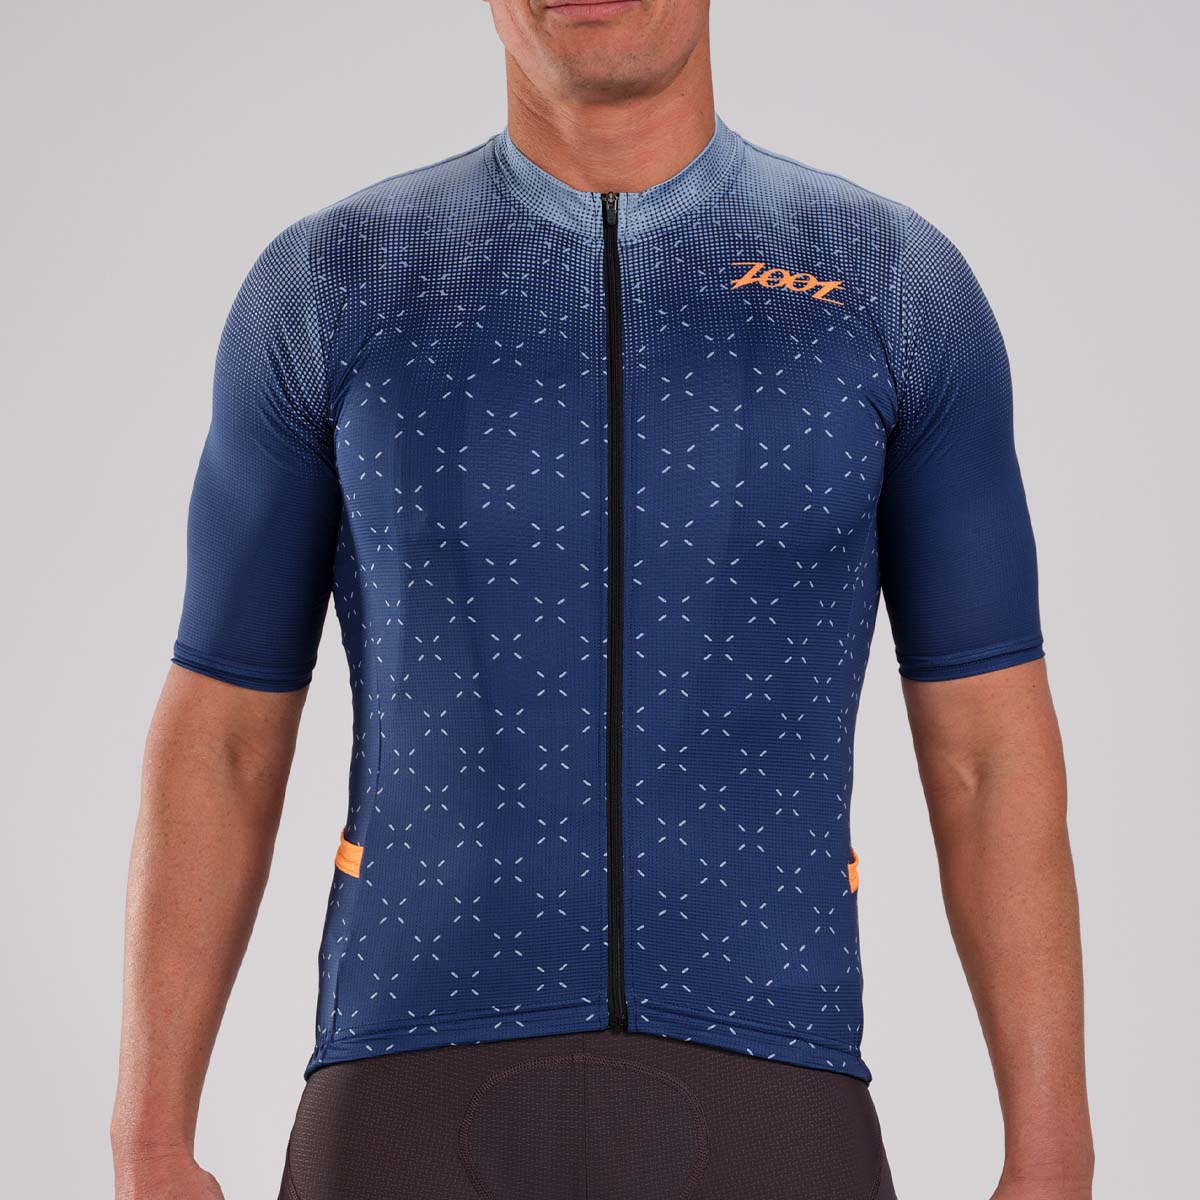 Zoot Sports CYCLE JERSEYS Men's Recon Cycle Jersey - Vista